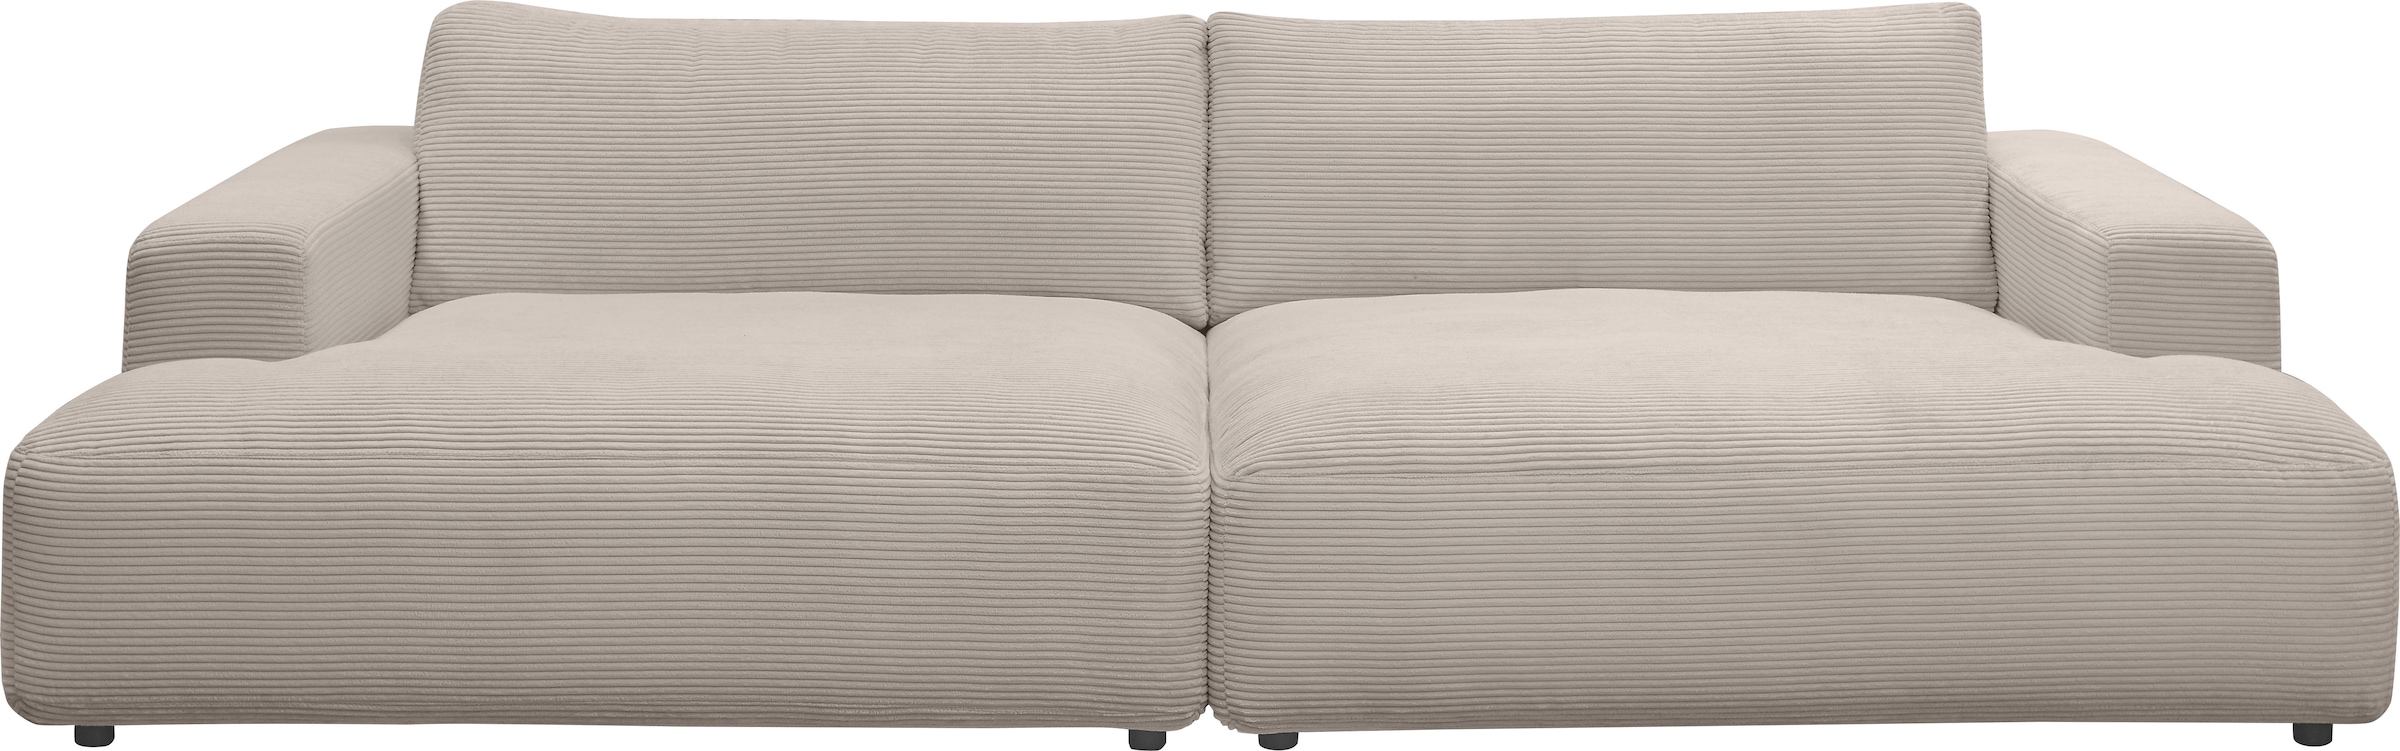 M Cord-Bezug, by Musterring GALLERY Breite cm branded kaufen Loungesofa »Lucia«, 292 bequem